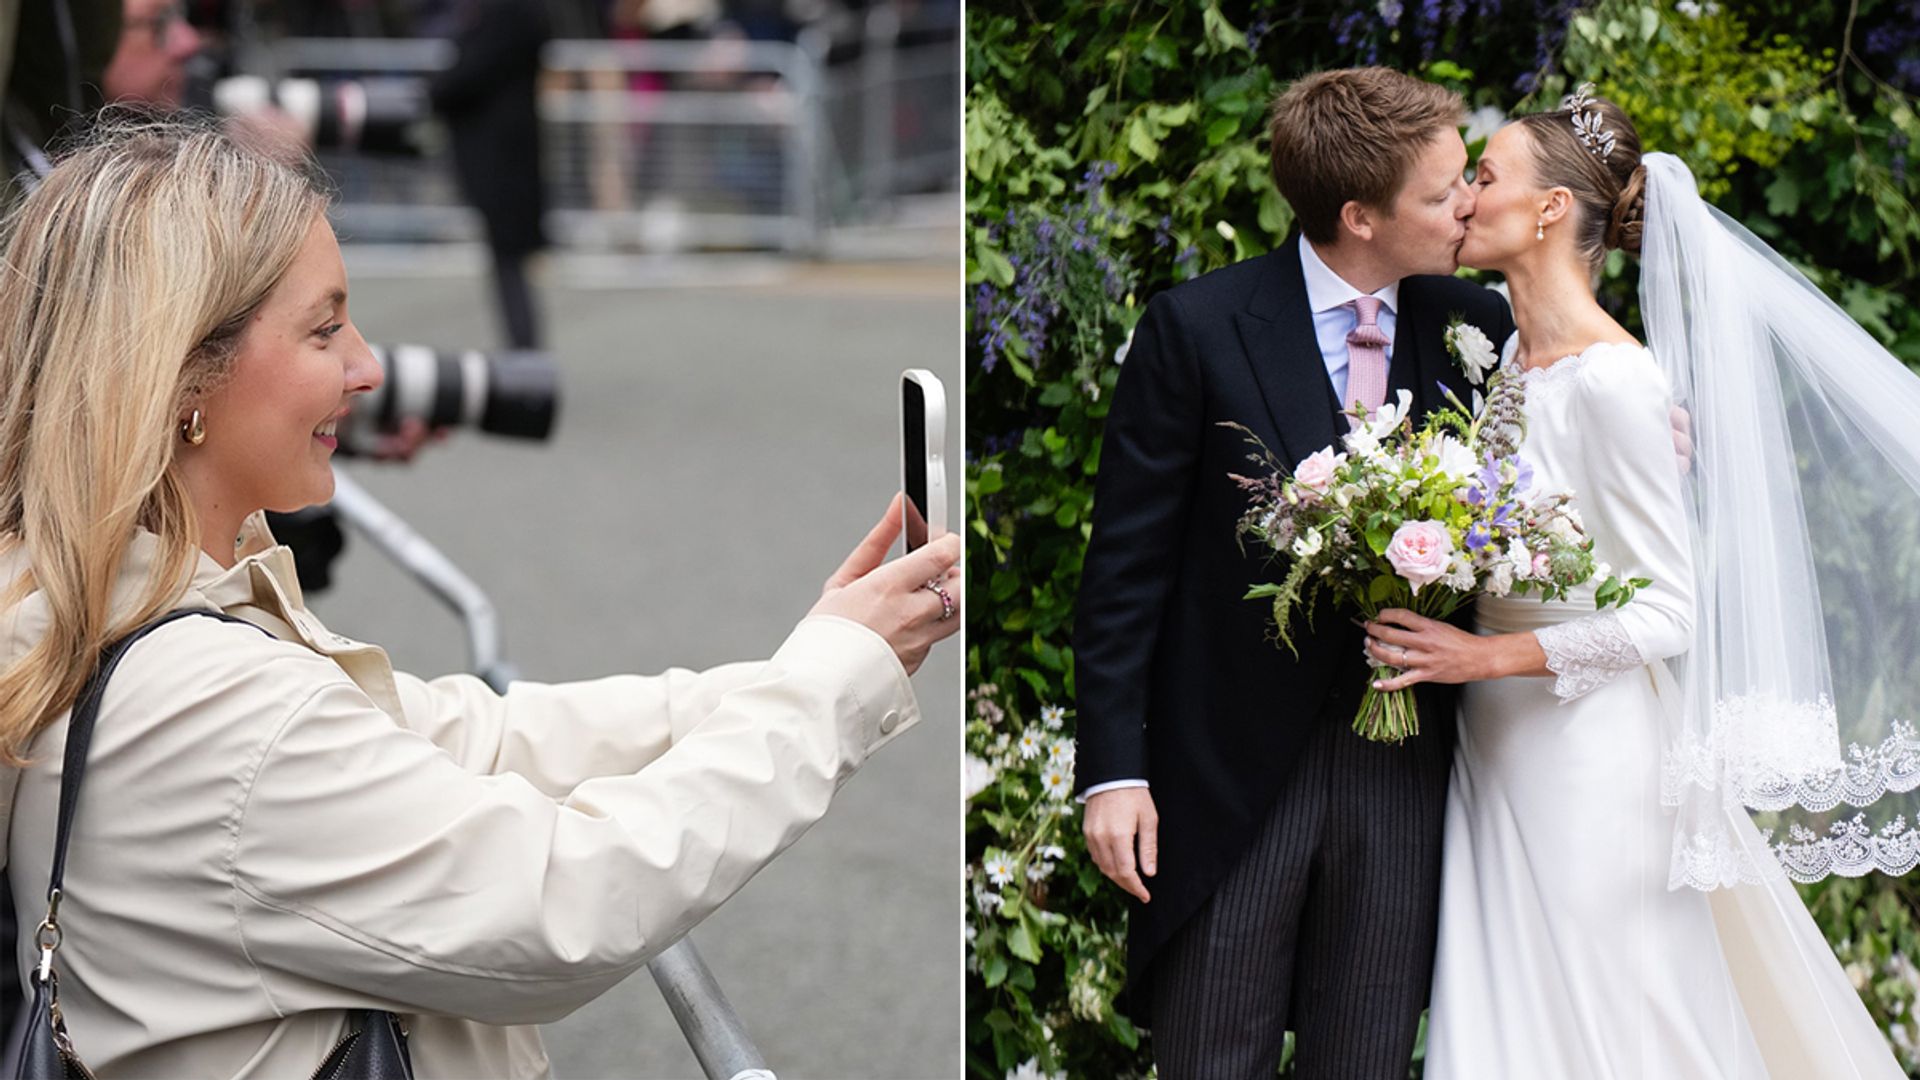 I spent 72 hours in Chester covering the Duke of Westminster's wedding and here's what happened